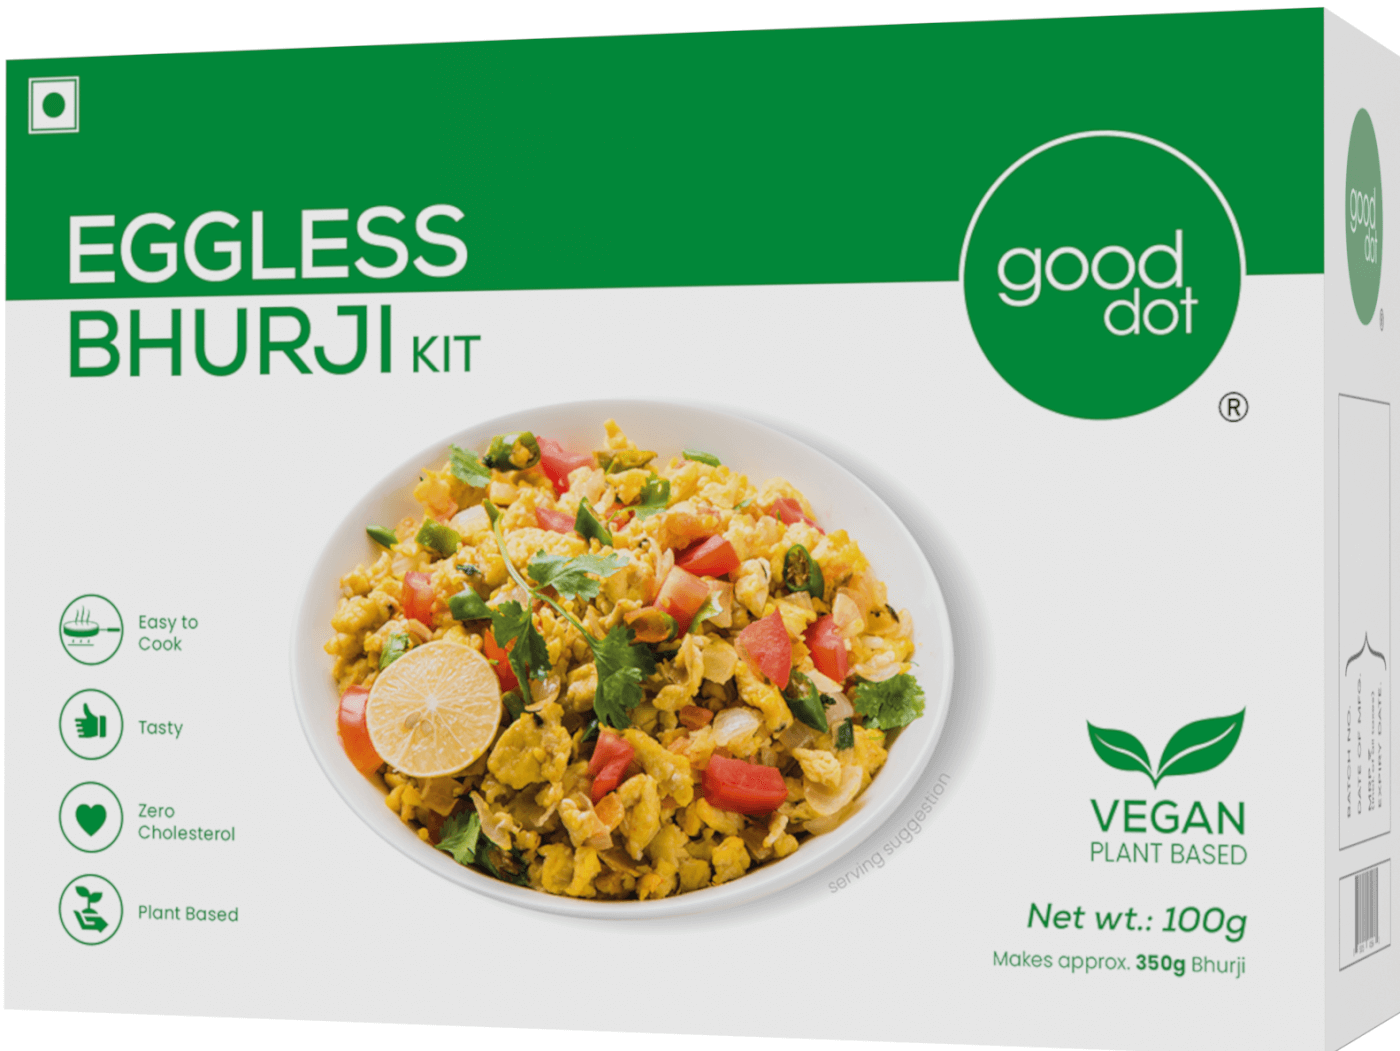 Contest Closed- Enter PETA India’s Contest To Try To Win GoodDot’s Eggless Bhurji Kit